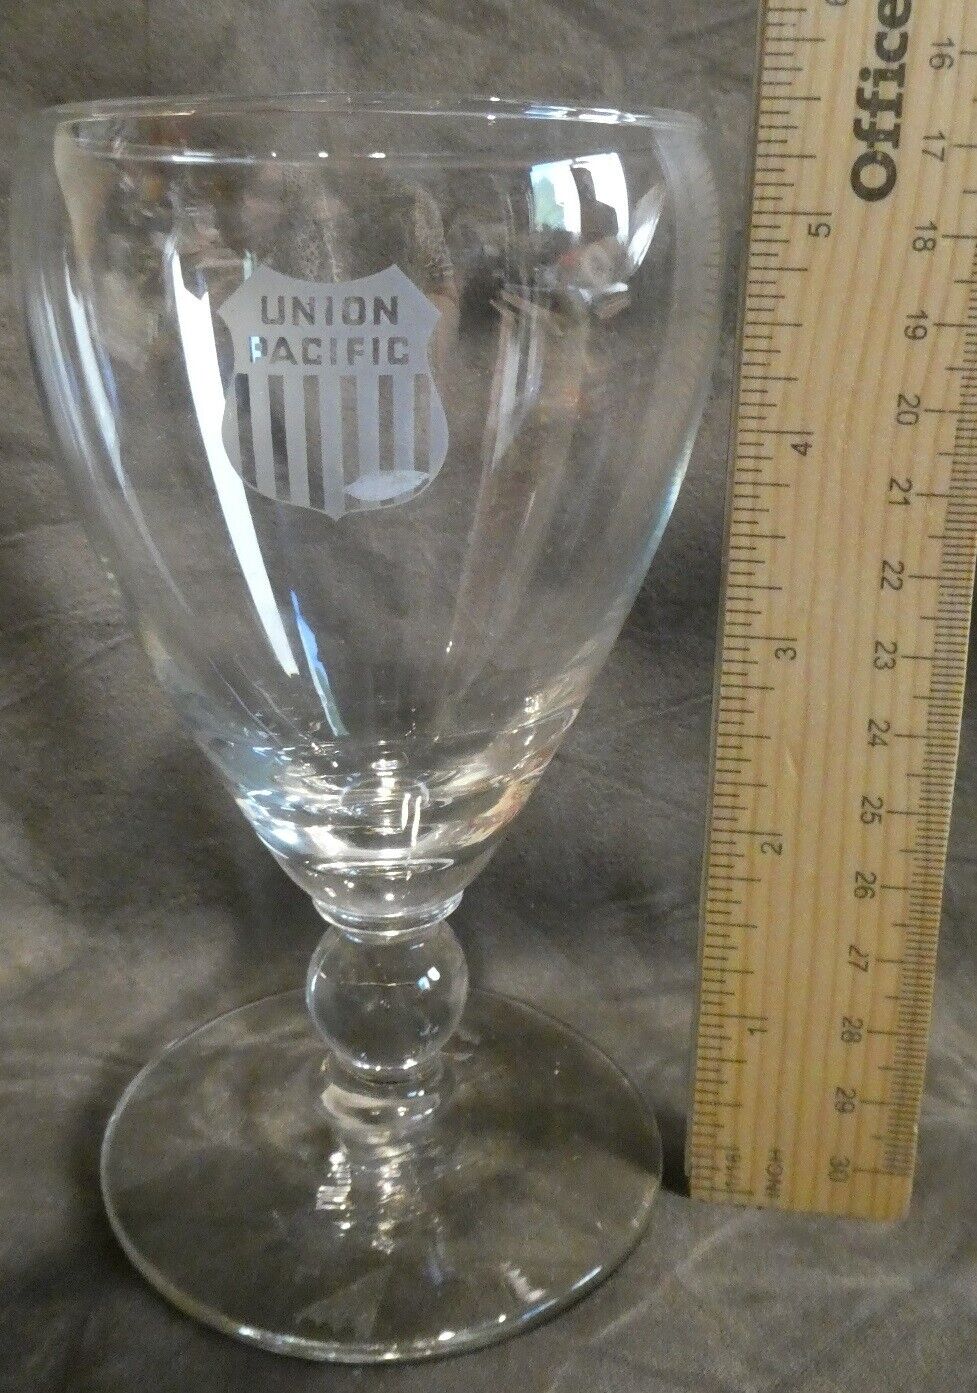 Railroad Dining China Union Pacific Etched Footed Water Glass Goblet